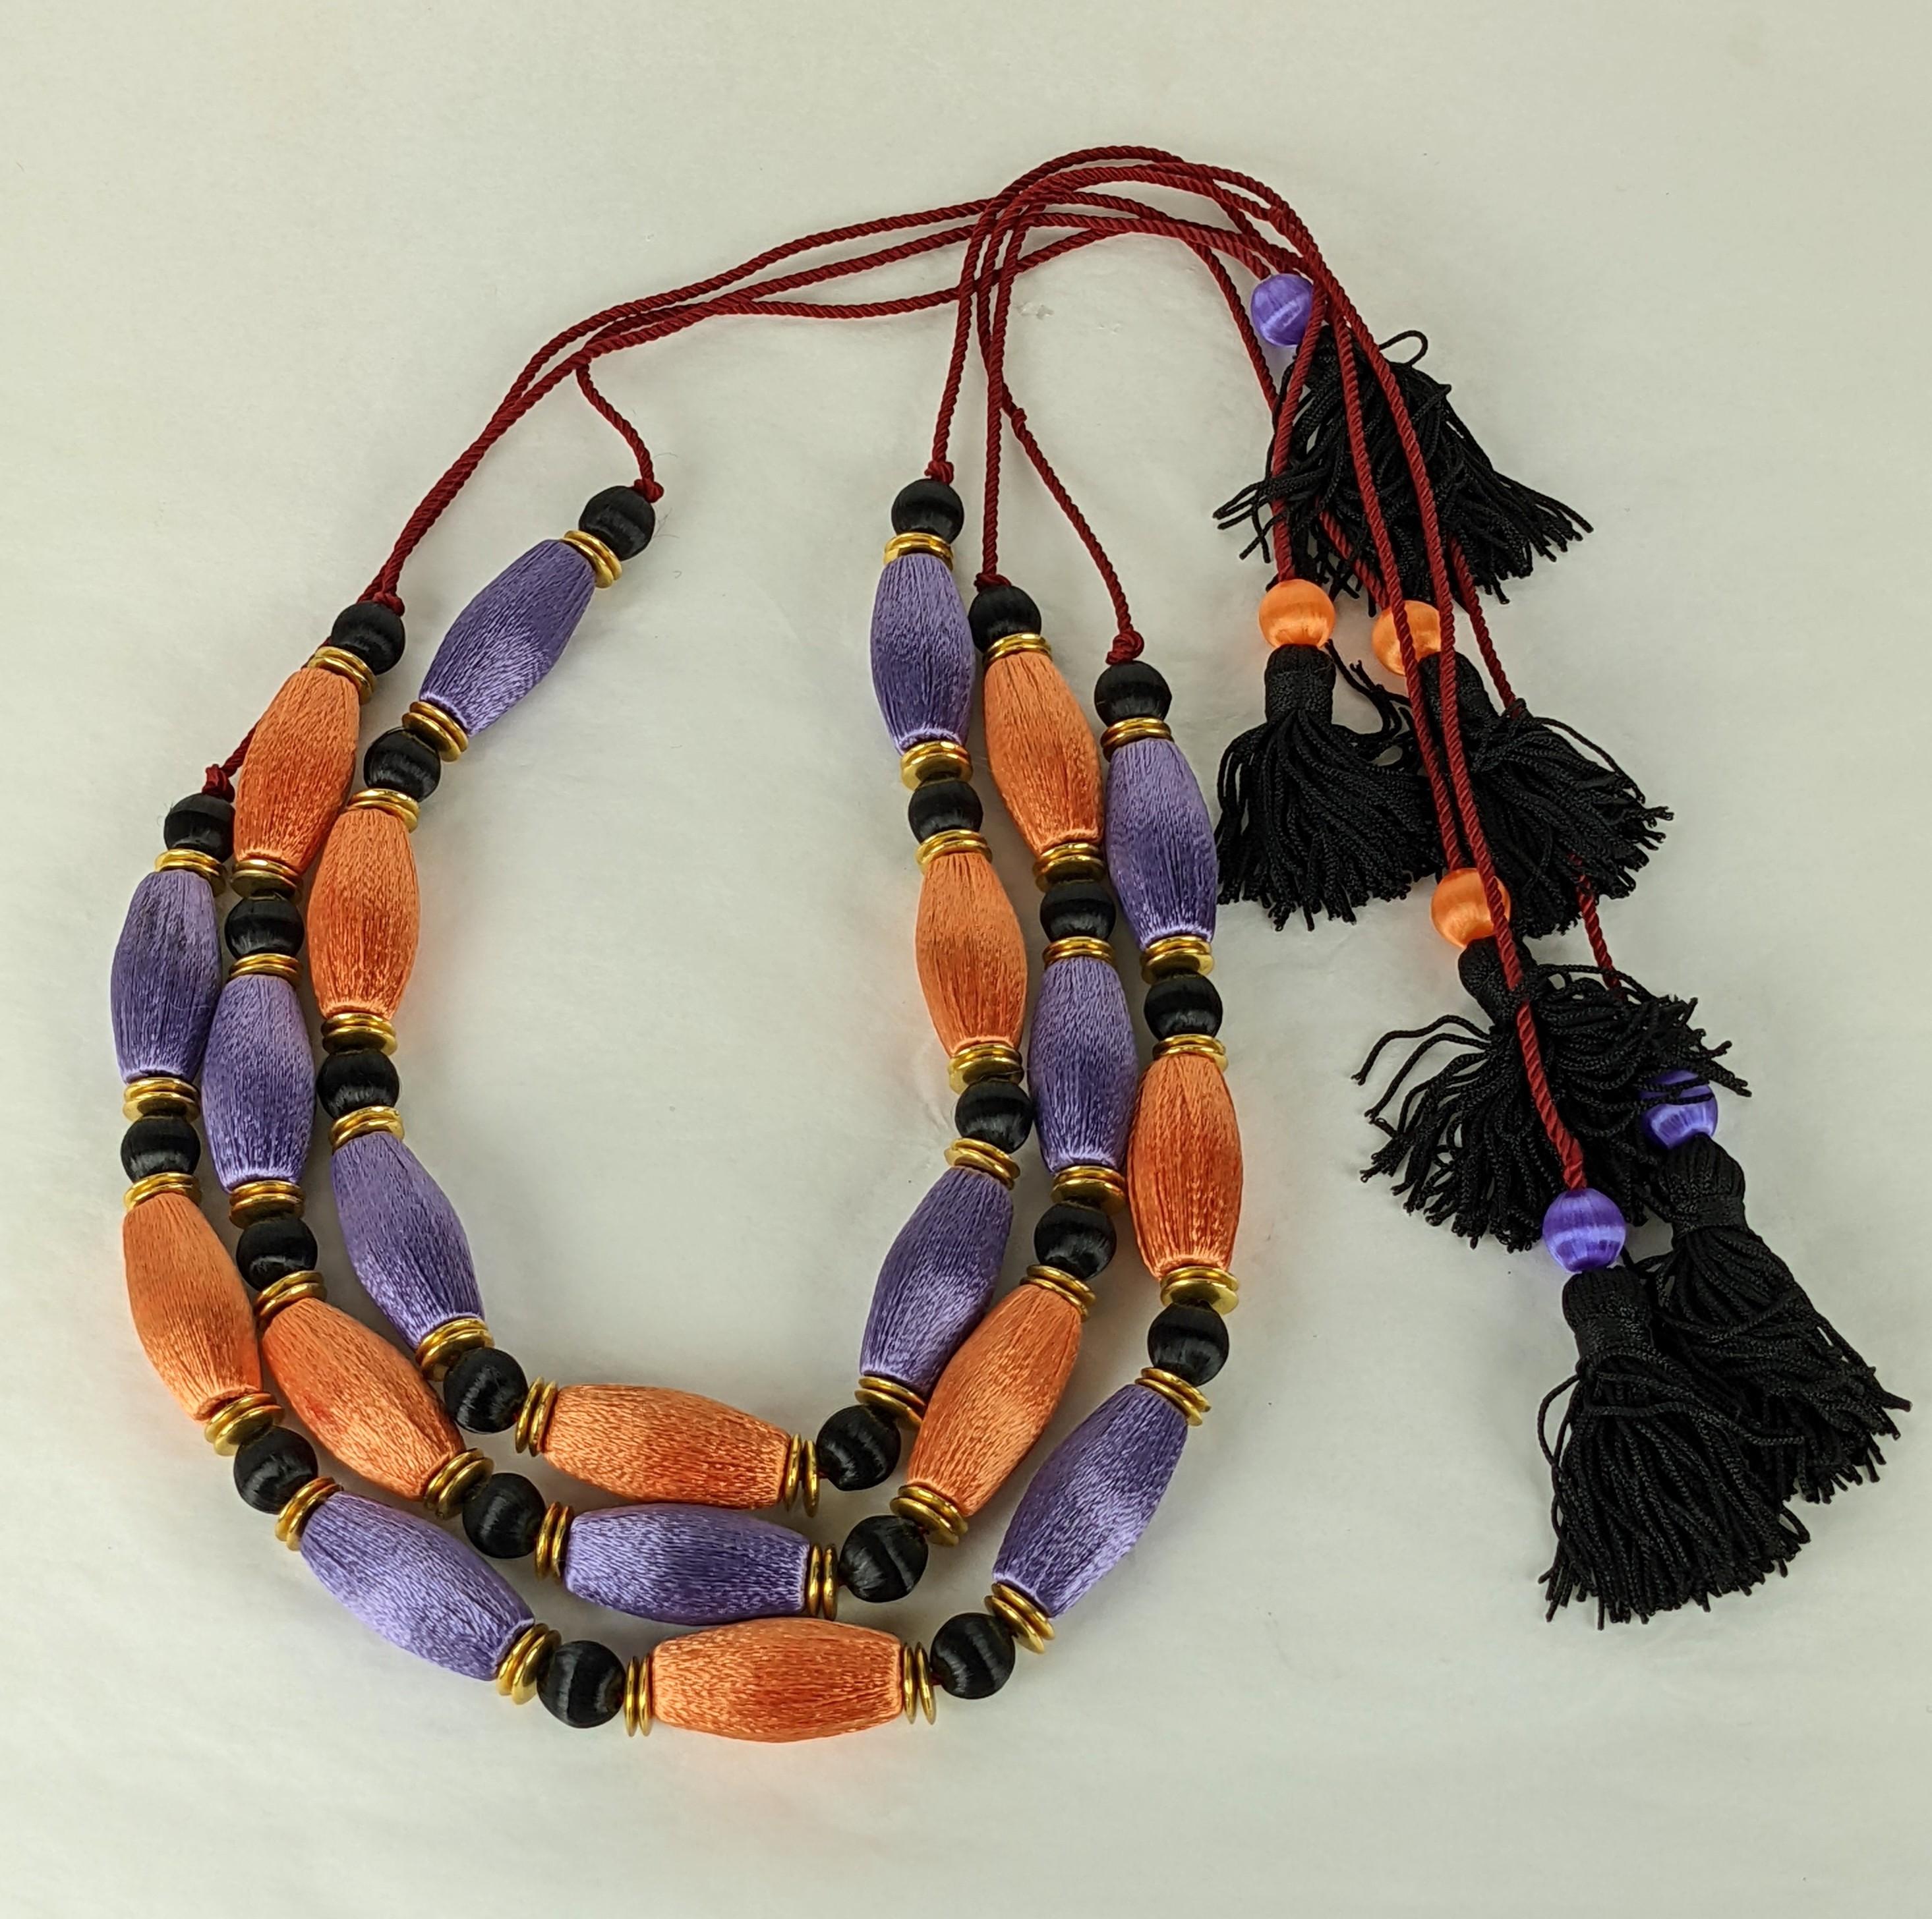 Amazing set of Yves Saint Laurent Haute Couture Passementerie necklaces of lilac and tangerine silk floss tube beads and gilt bronze saucer bead spacers.  Each Chinoiserie inspired necklace is strung on deep red cord with small black tassel ties.